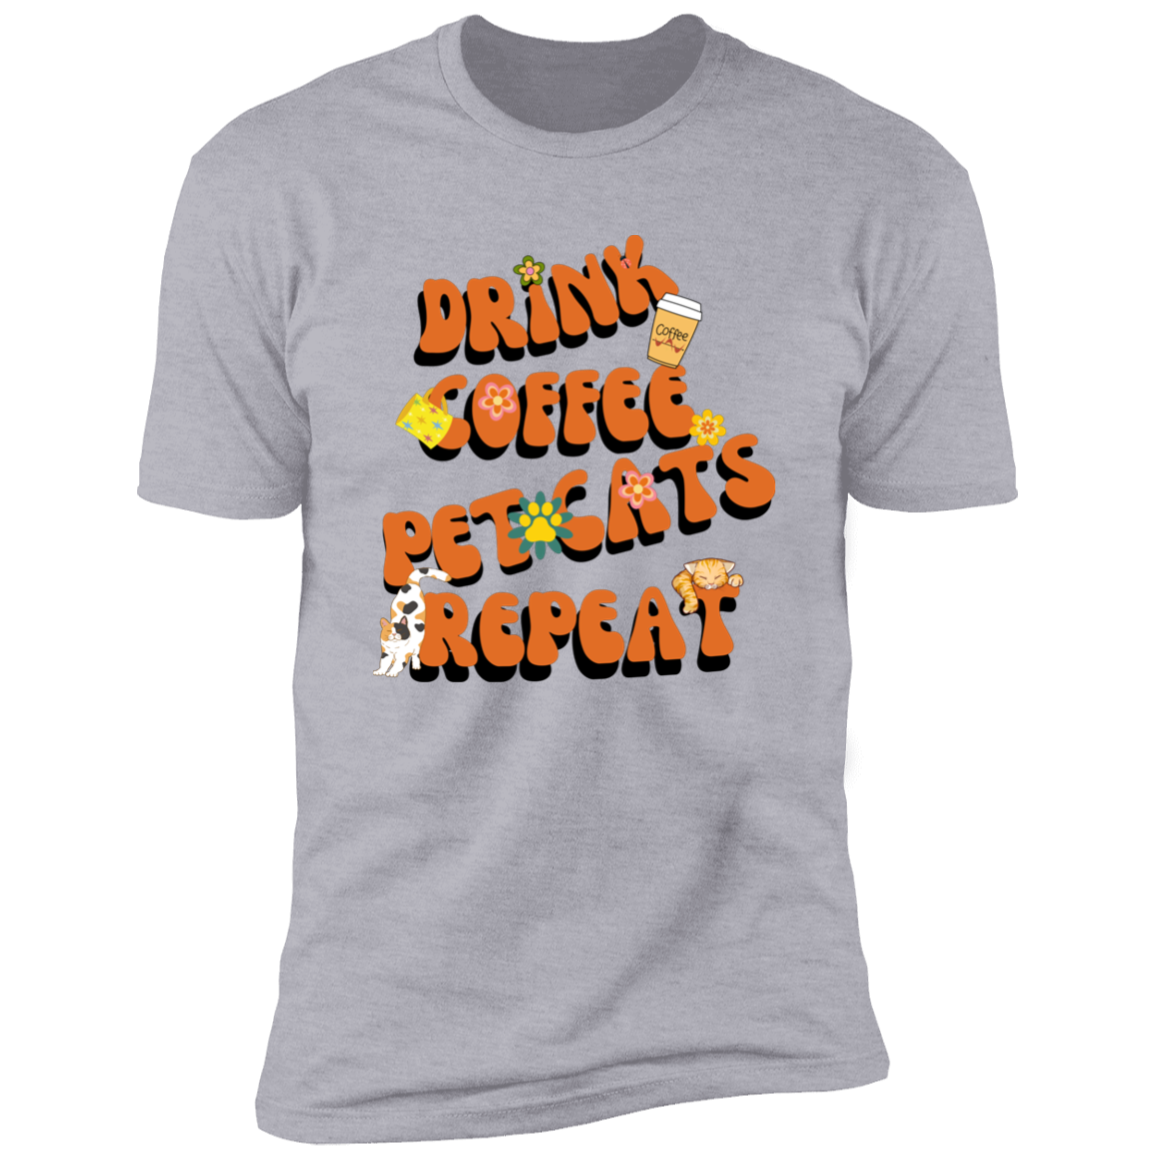 Drink Coffee Pet Cats Repeat T-shirt, Cat t-shirt for humans, in light heather gray